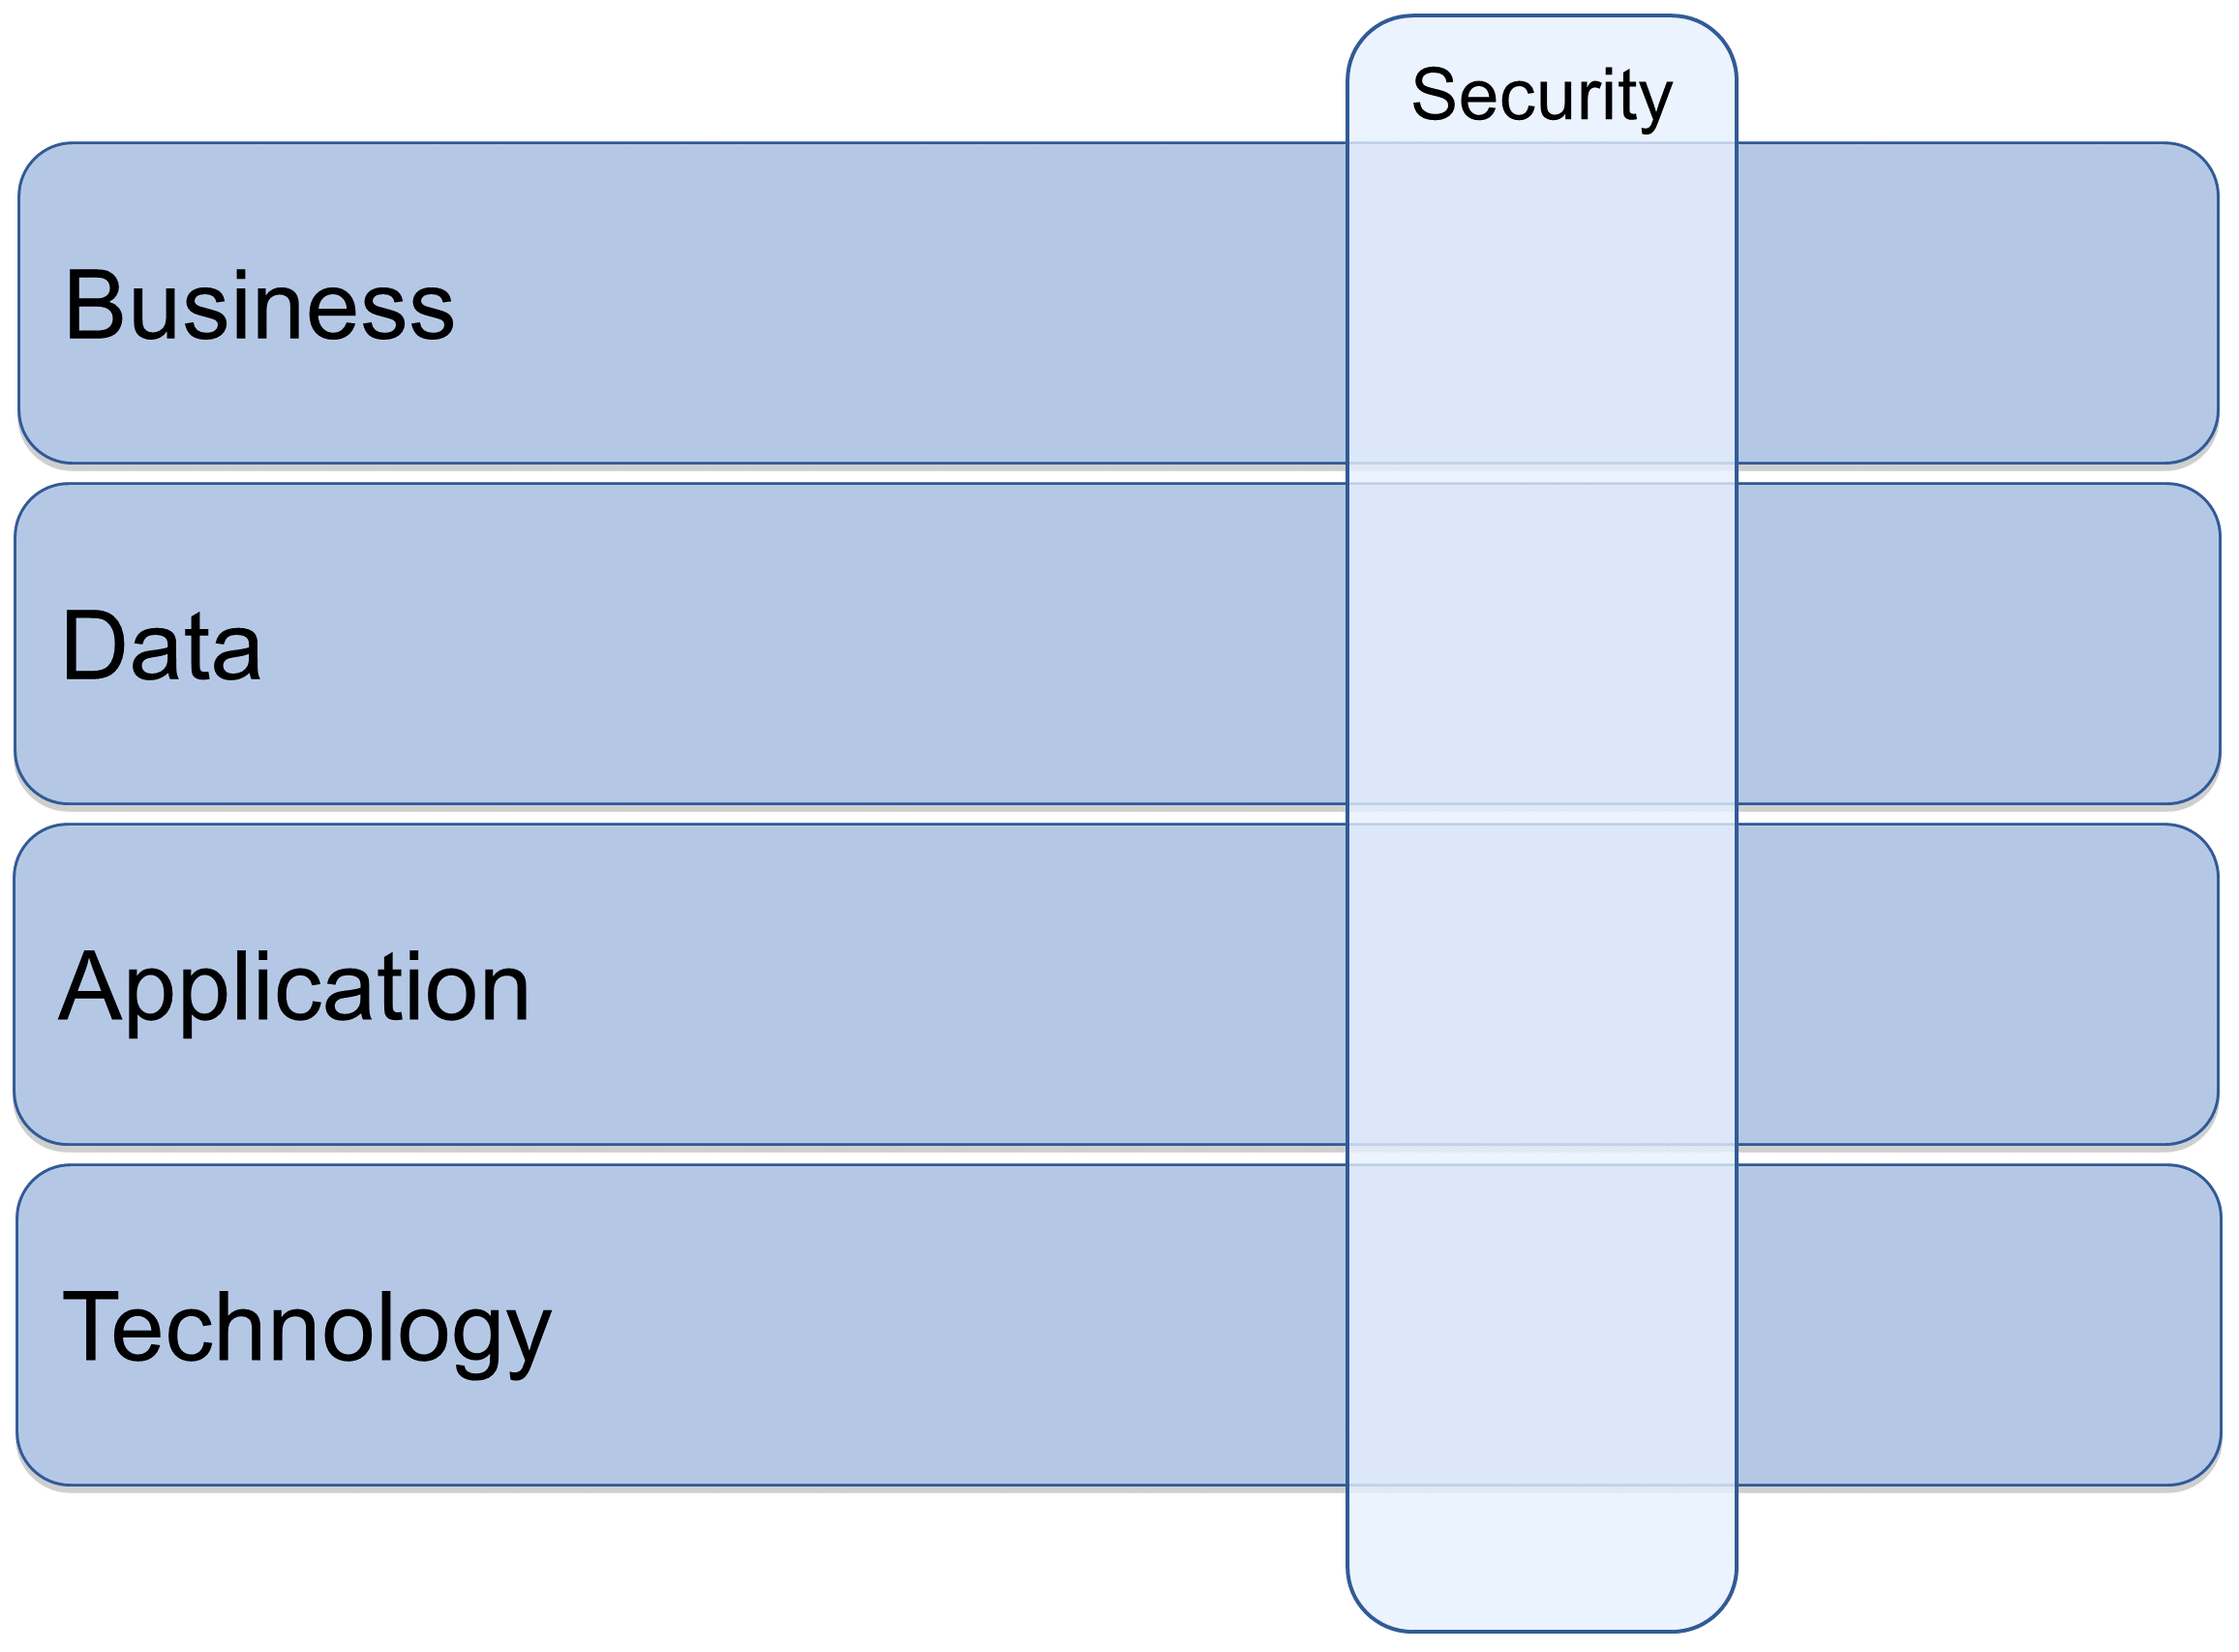 Security as a Cross-Cutting Concern through the Architecture